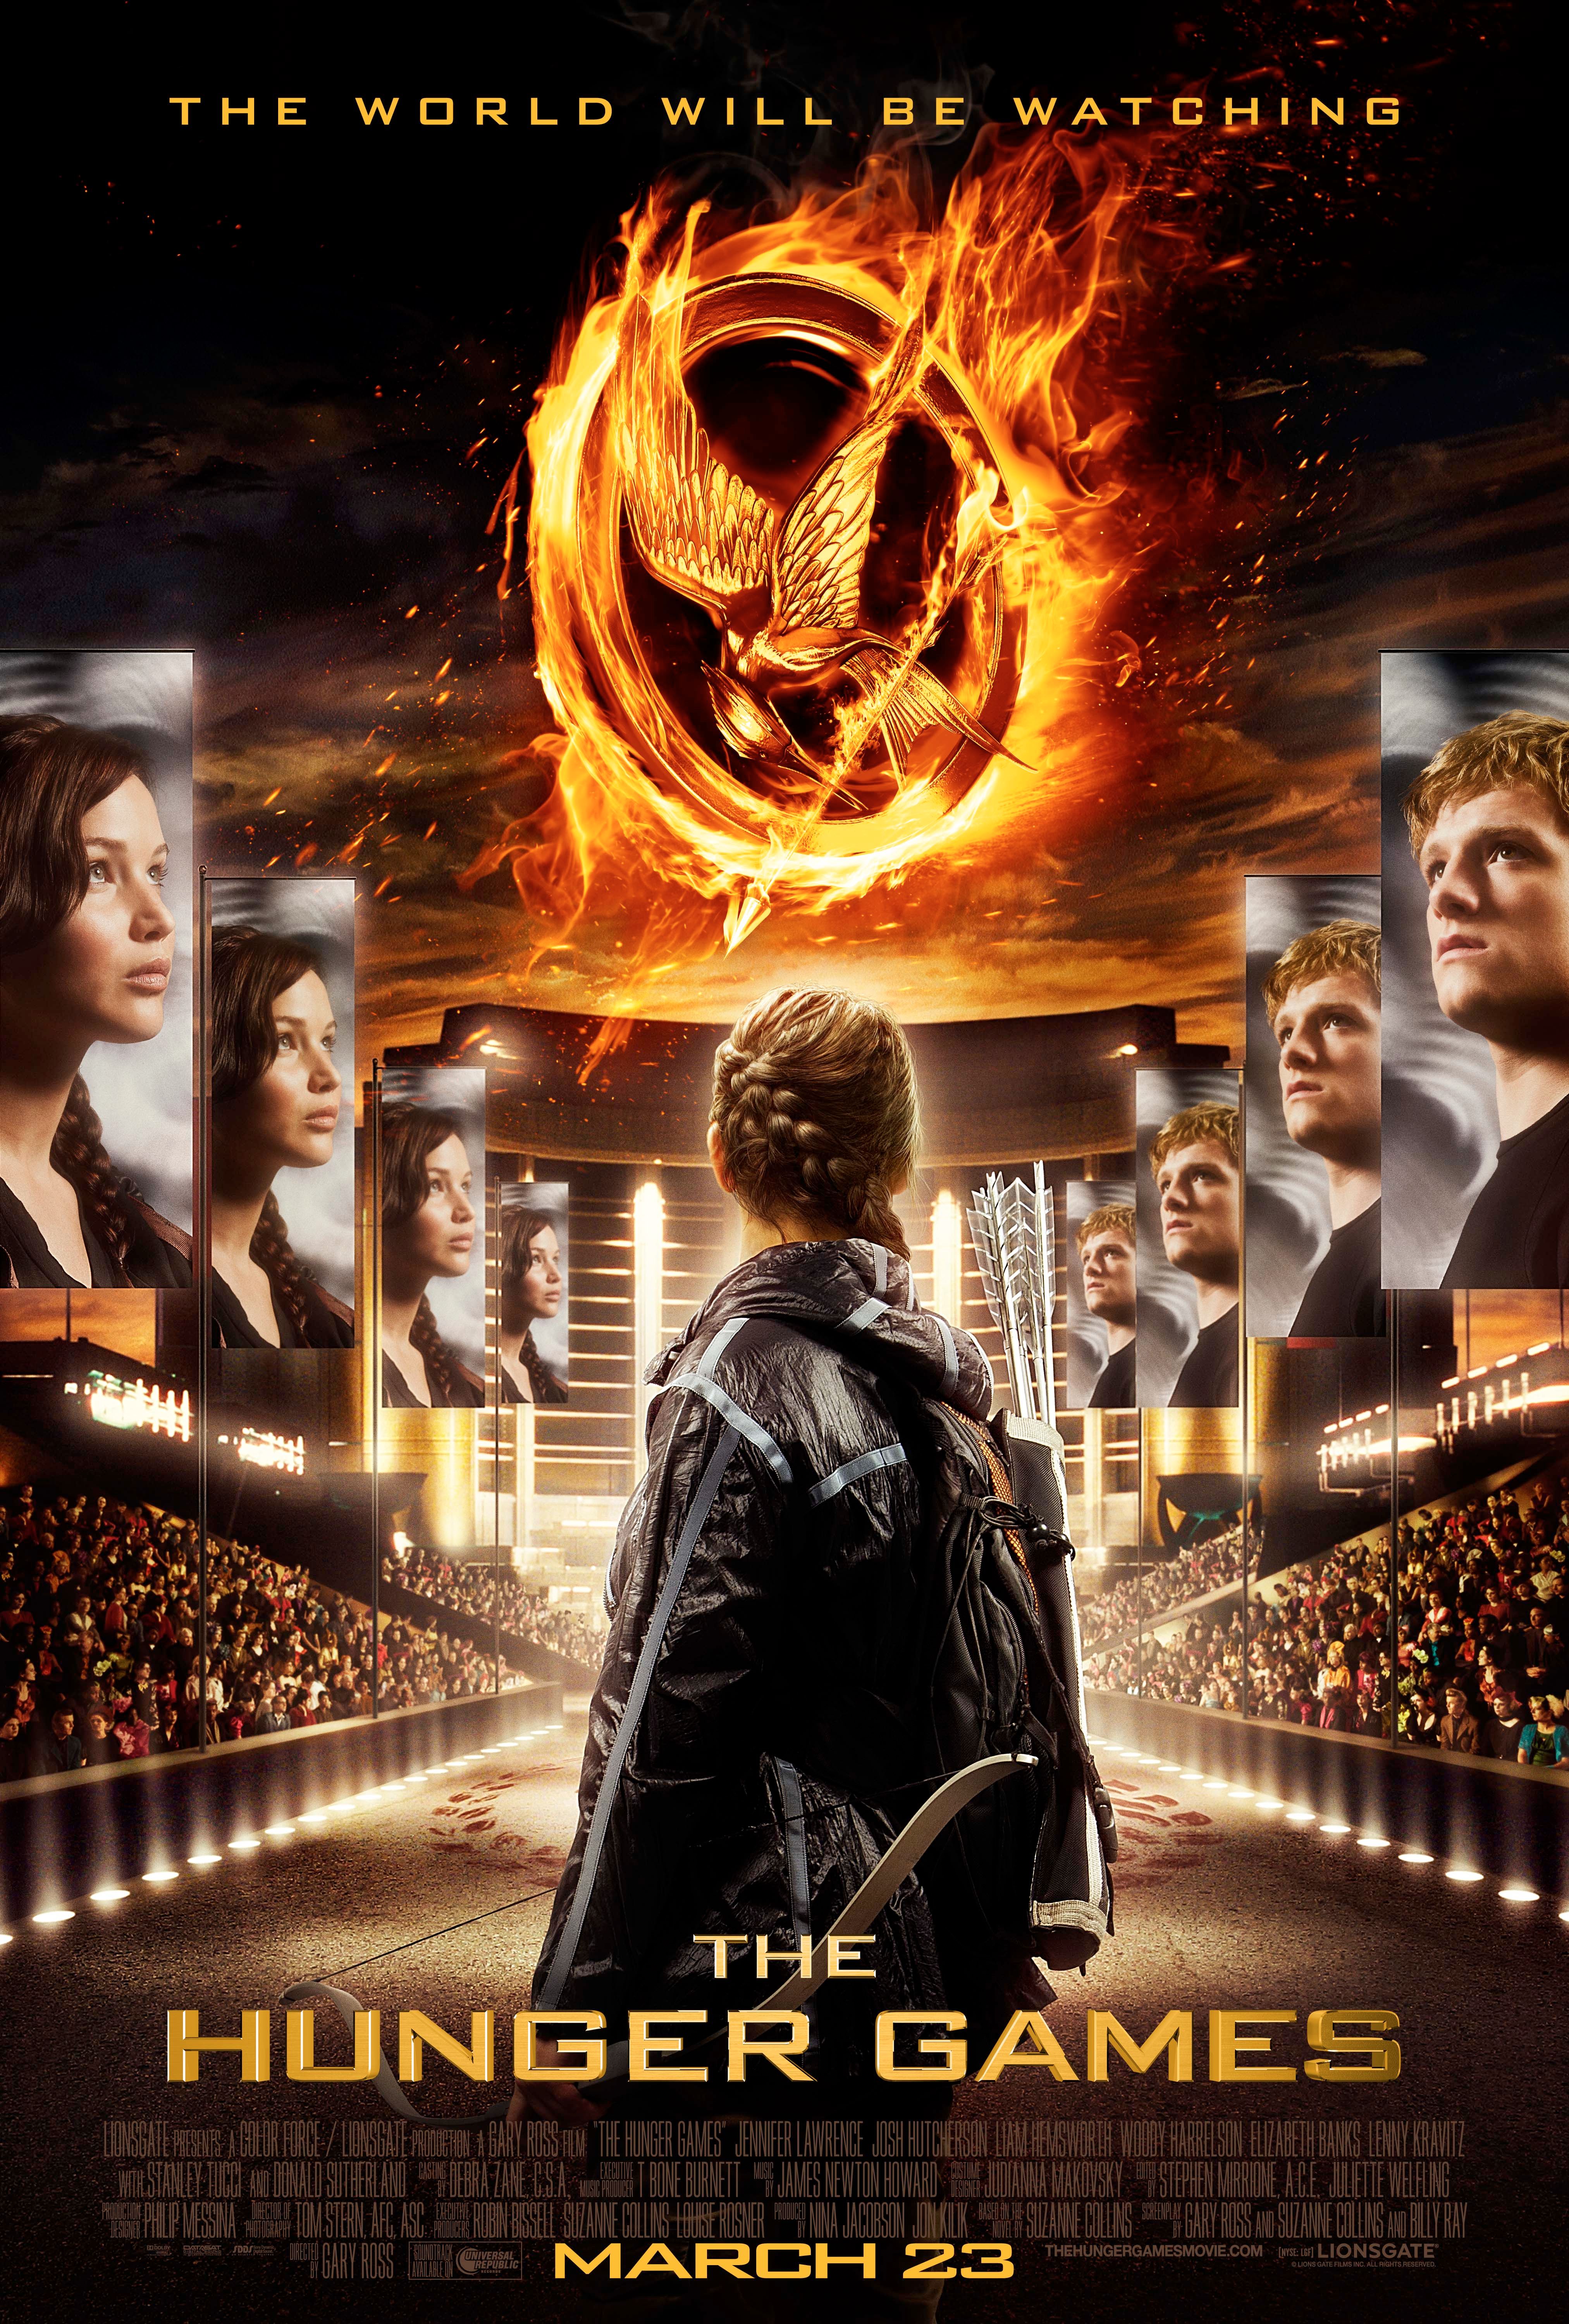 The Hunger Game